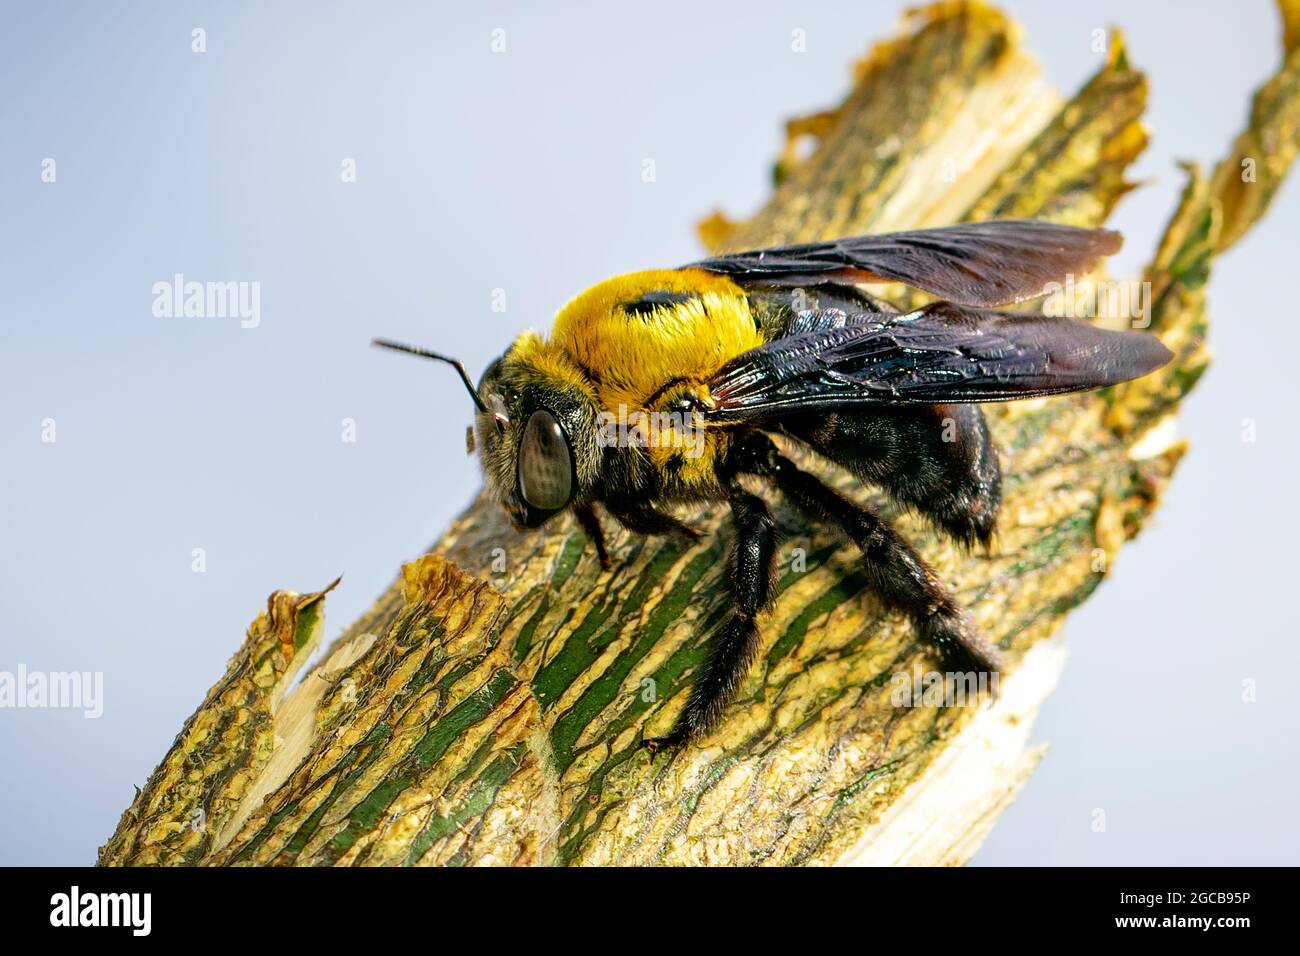 Image of Yellow Carpenter Bee (Xylocopa latipes) on the branches on a natural background. Insect. Animal. Stock Photo